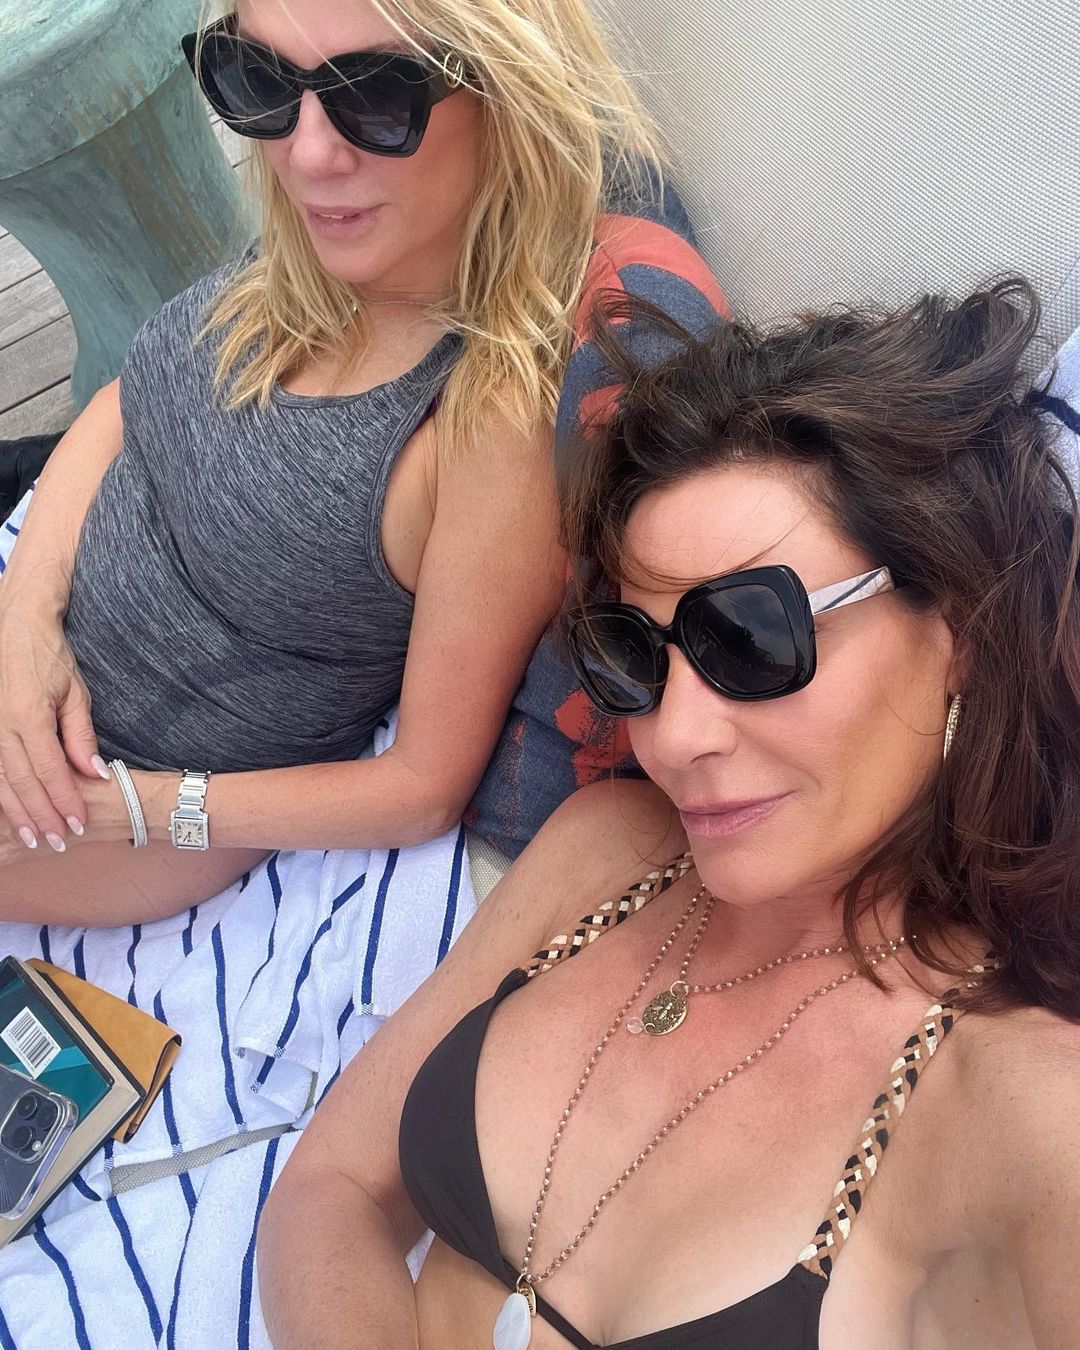 Ramona Singer and Luann de Lesseps enjoy some downtime in the sun